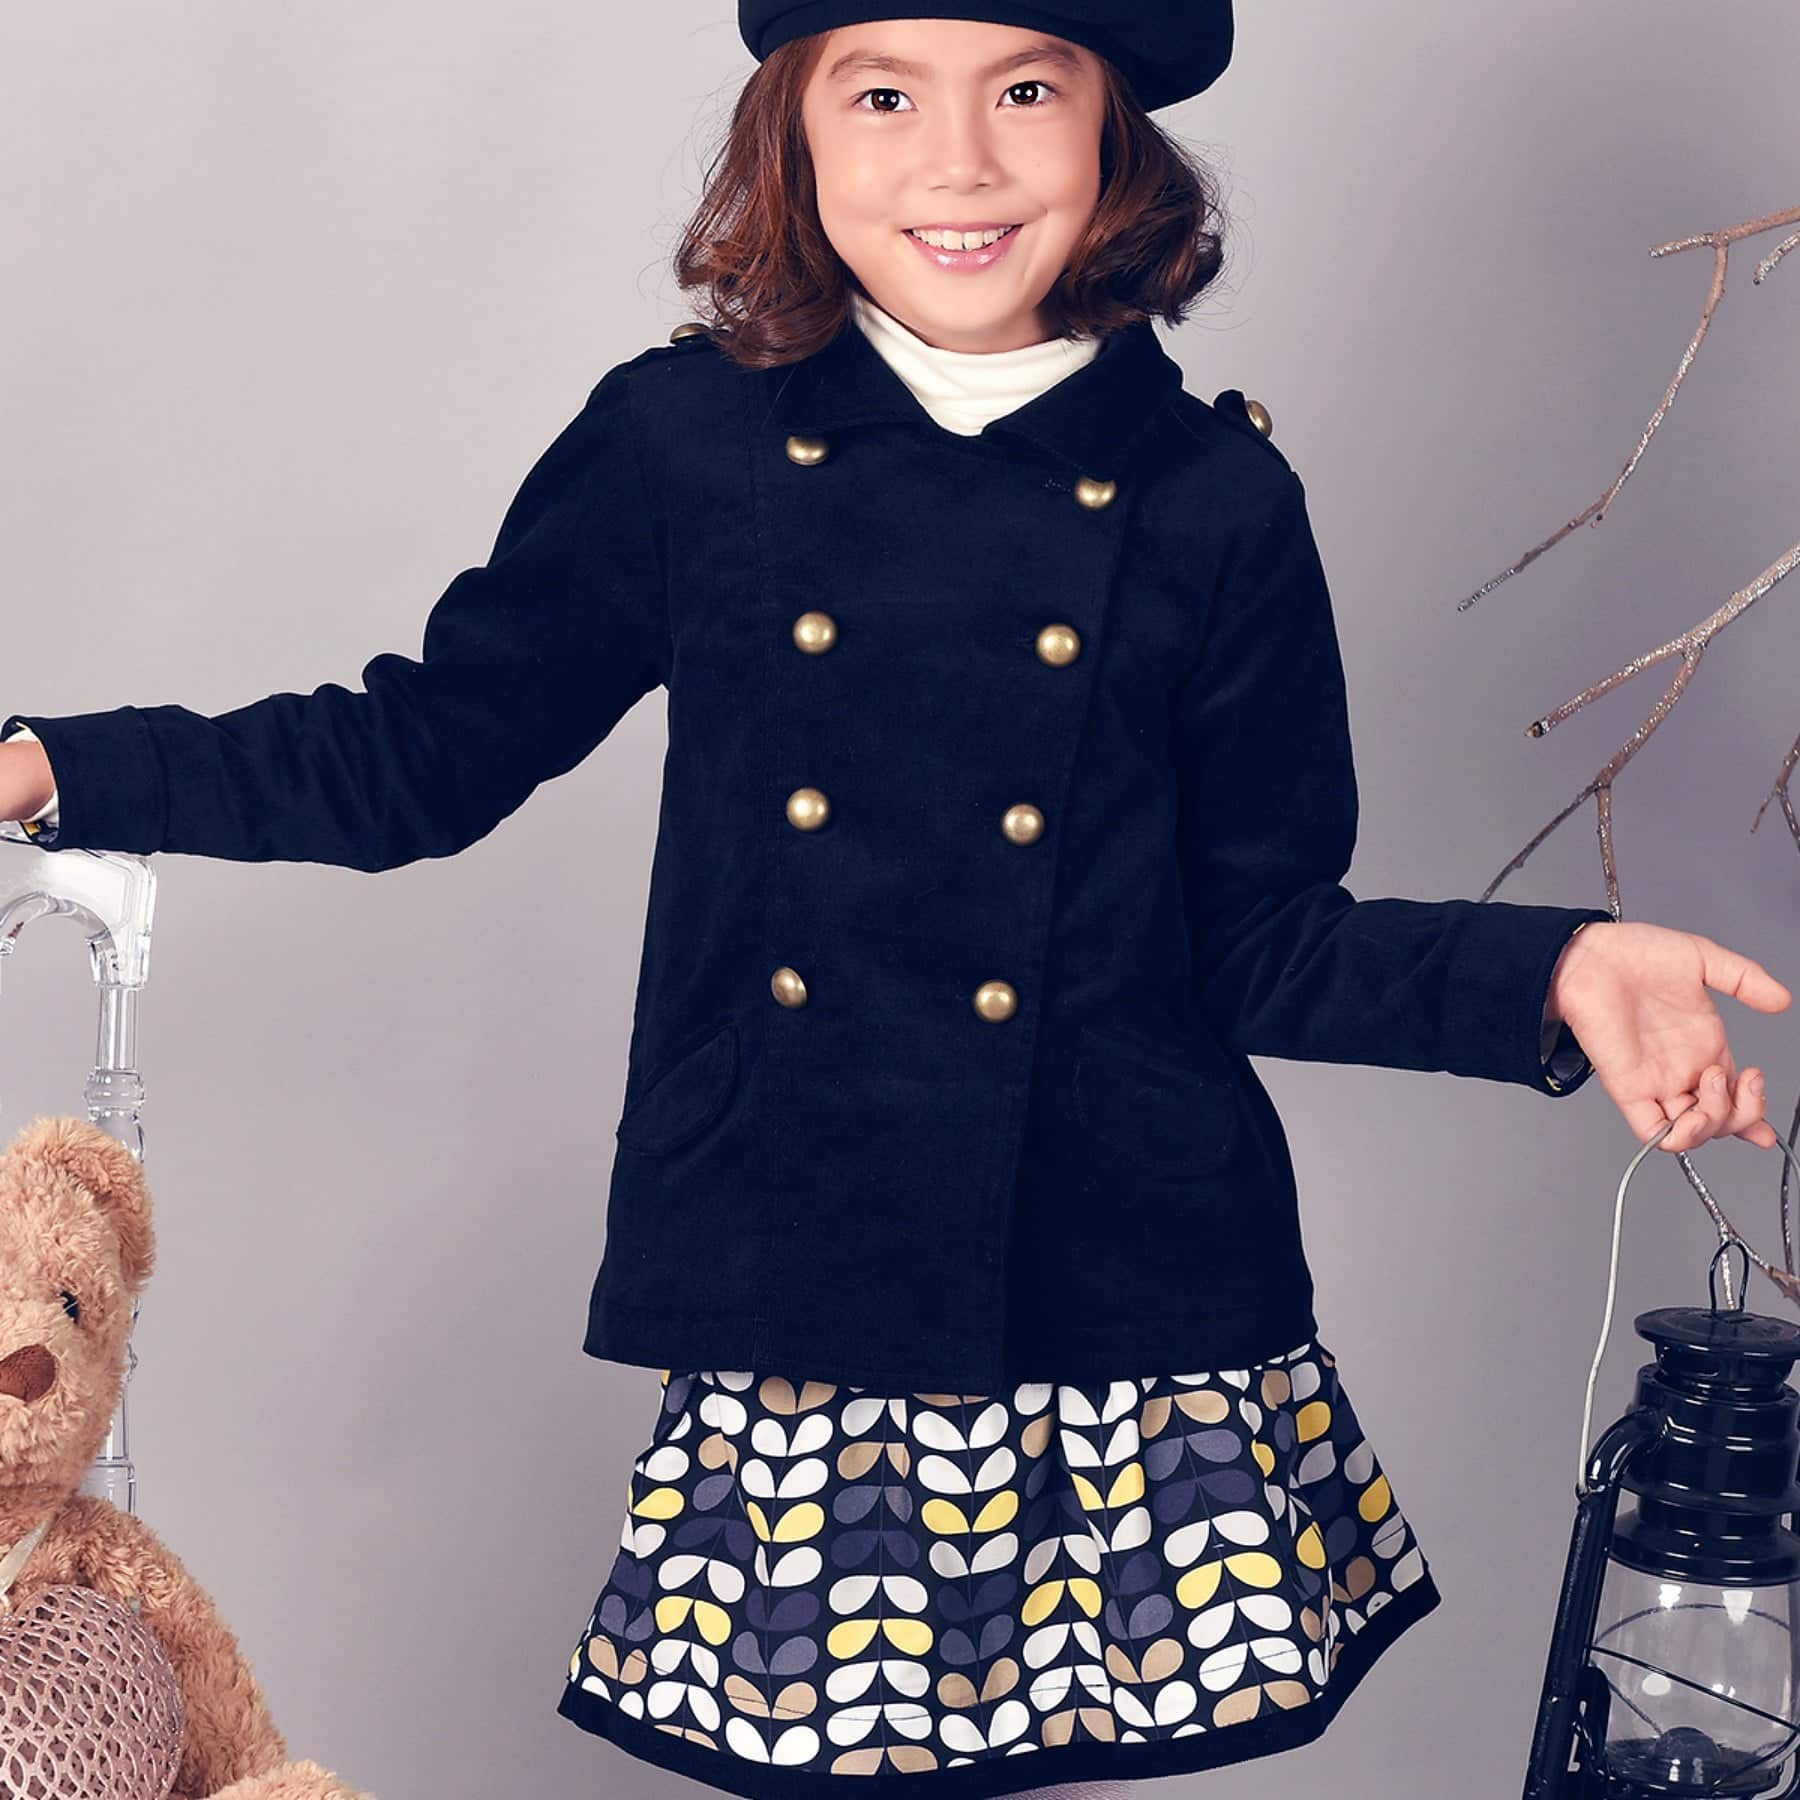 Double-breasted jacket in black velvet for girls from the children's fashion brand La Faute à Voltaire